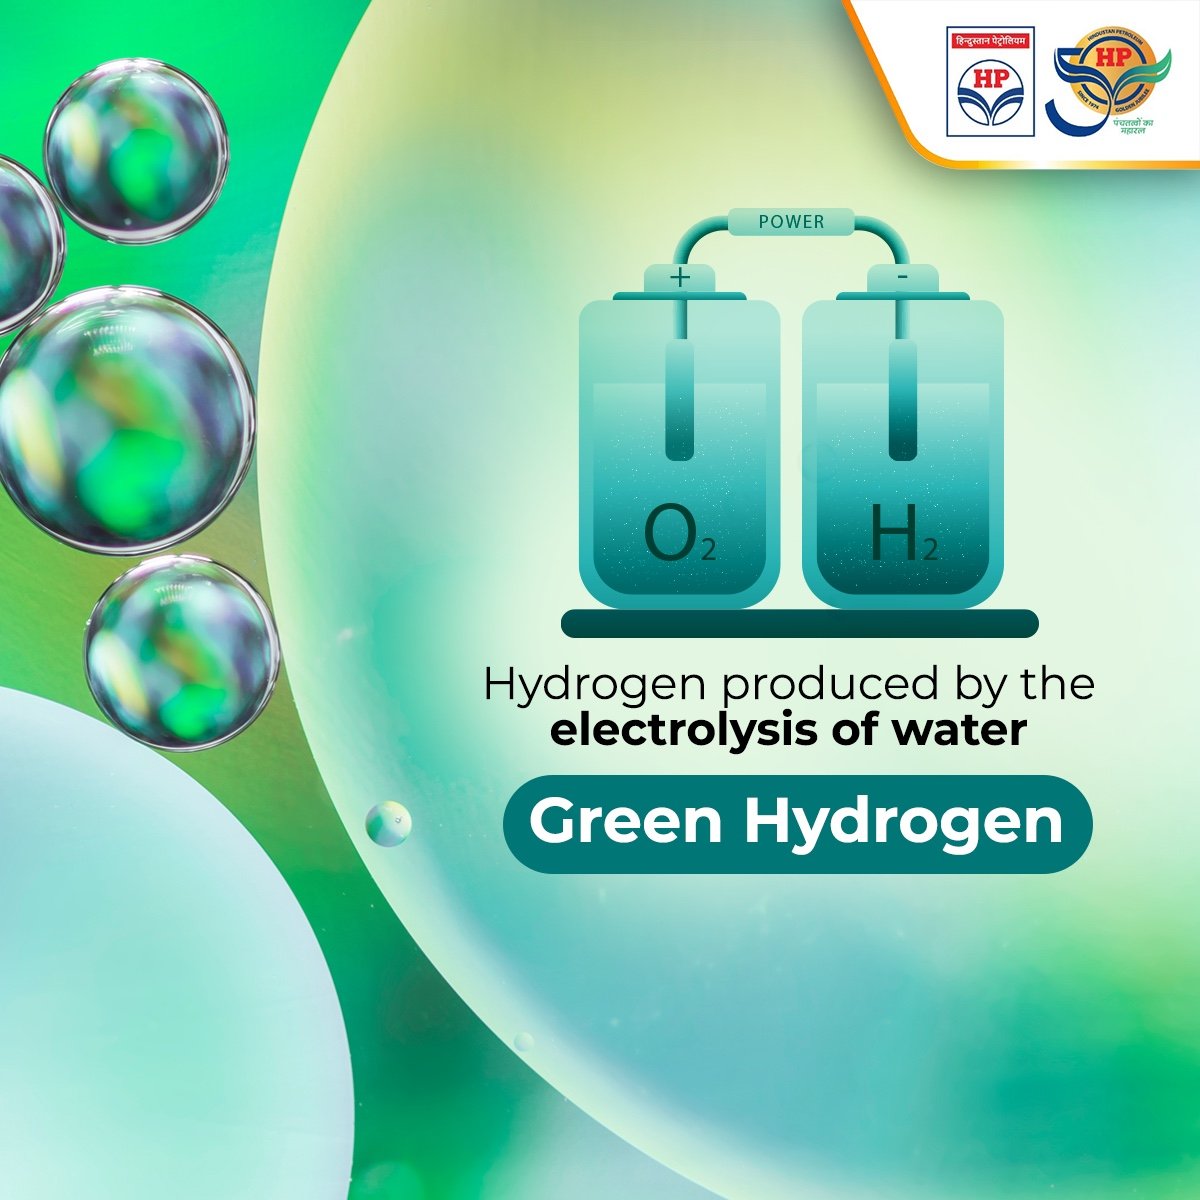 Green Hydrogen, produced by the electrolysis of water – a process powered entirely by renewable energy, is the cleanest and most sustainable of all types of Hydrogen. It has a zero pollution index making it a valuable resource in fighting climate change as it can be used to